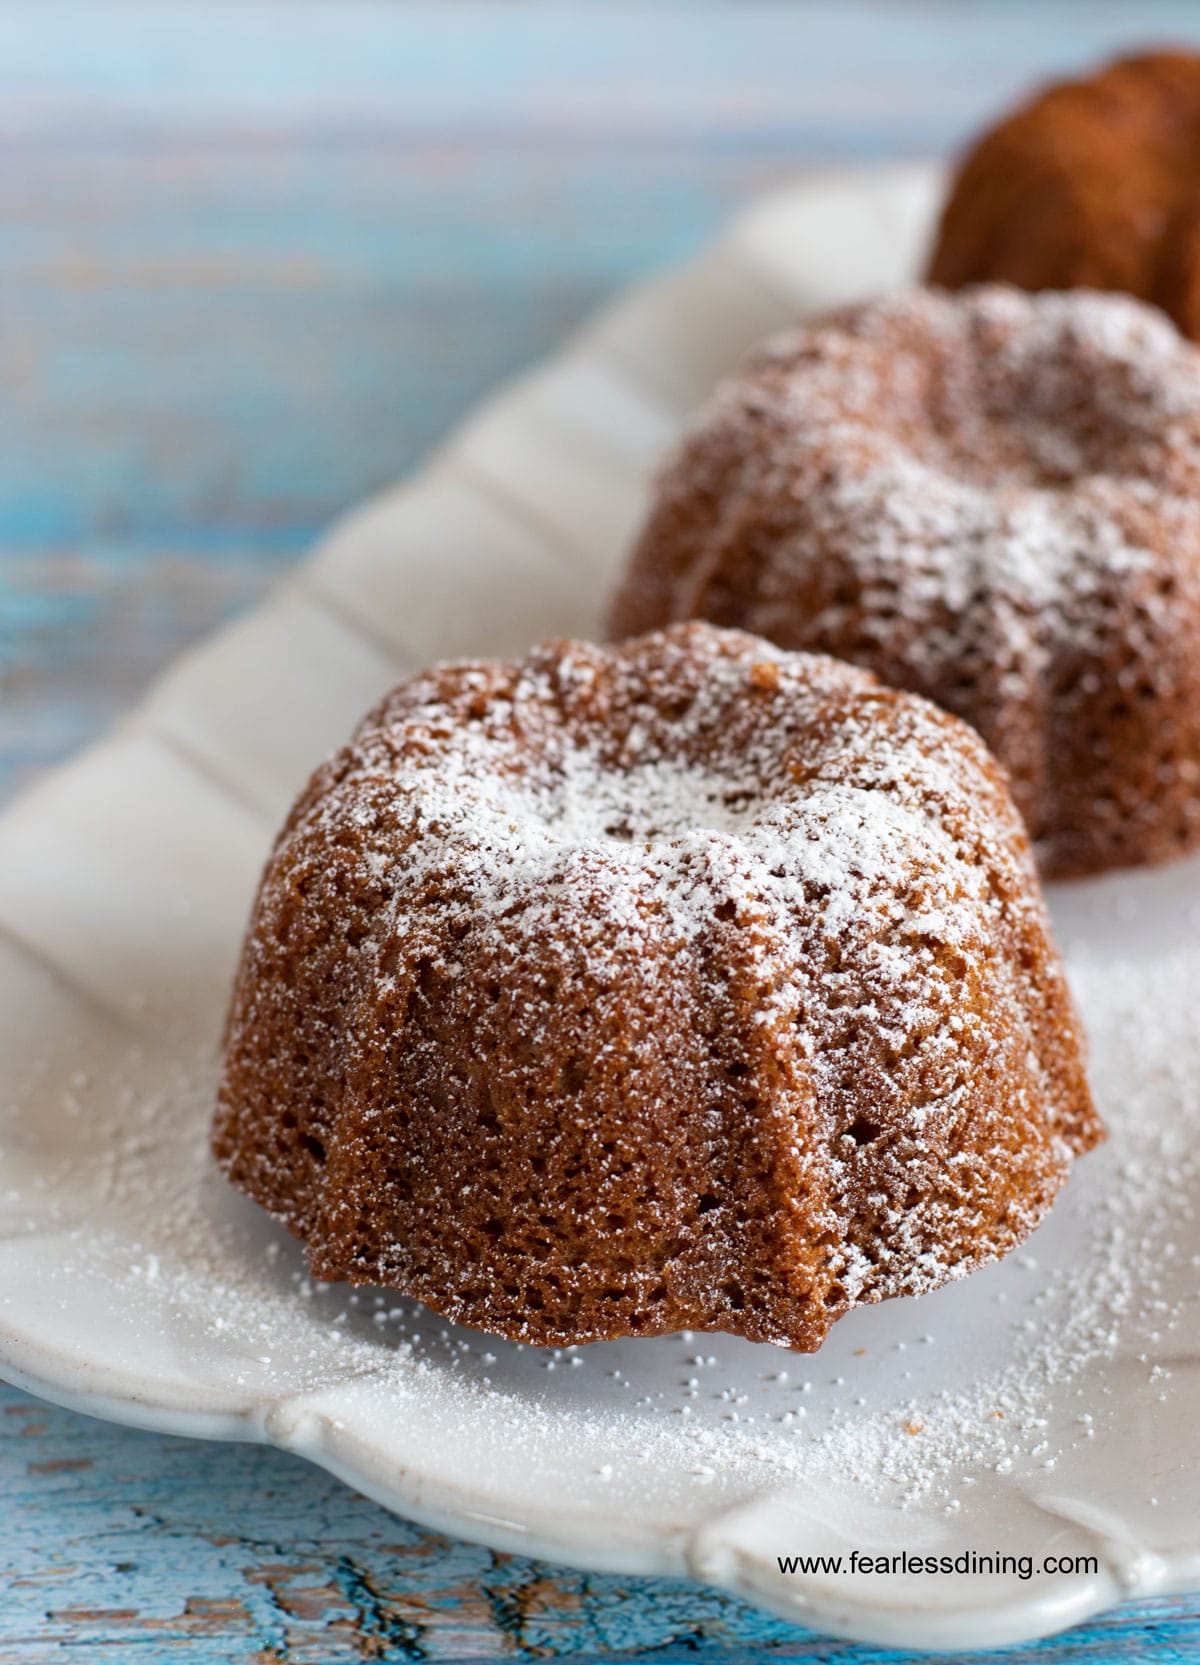 A row of small honey cakes dusted with powdered sugar.